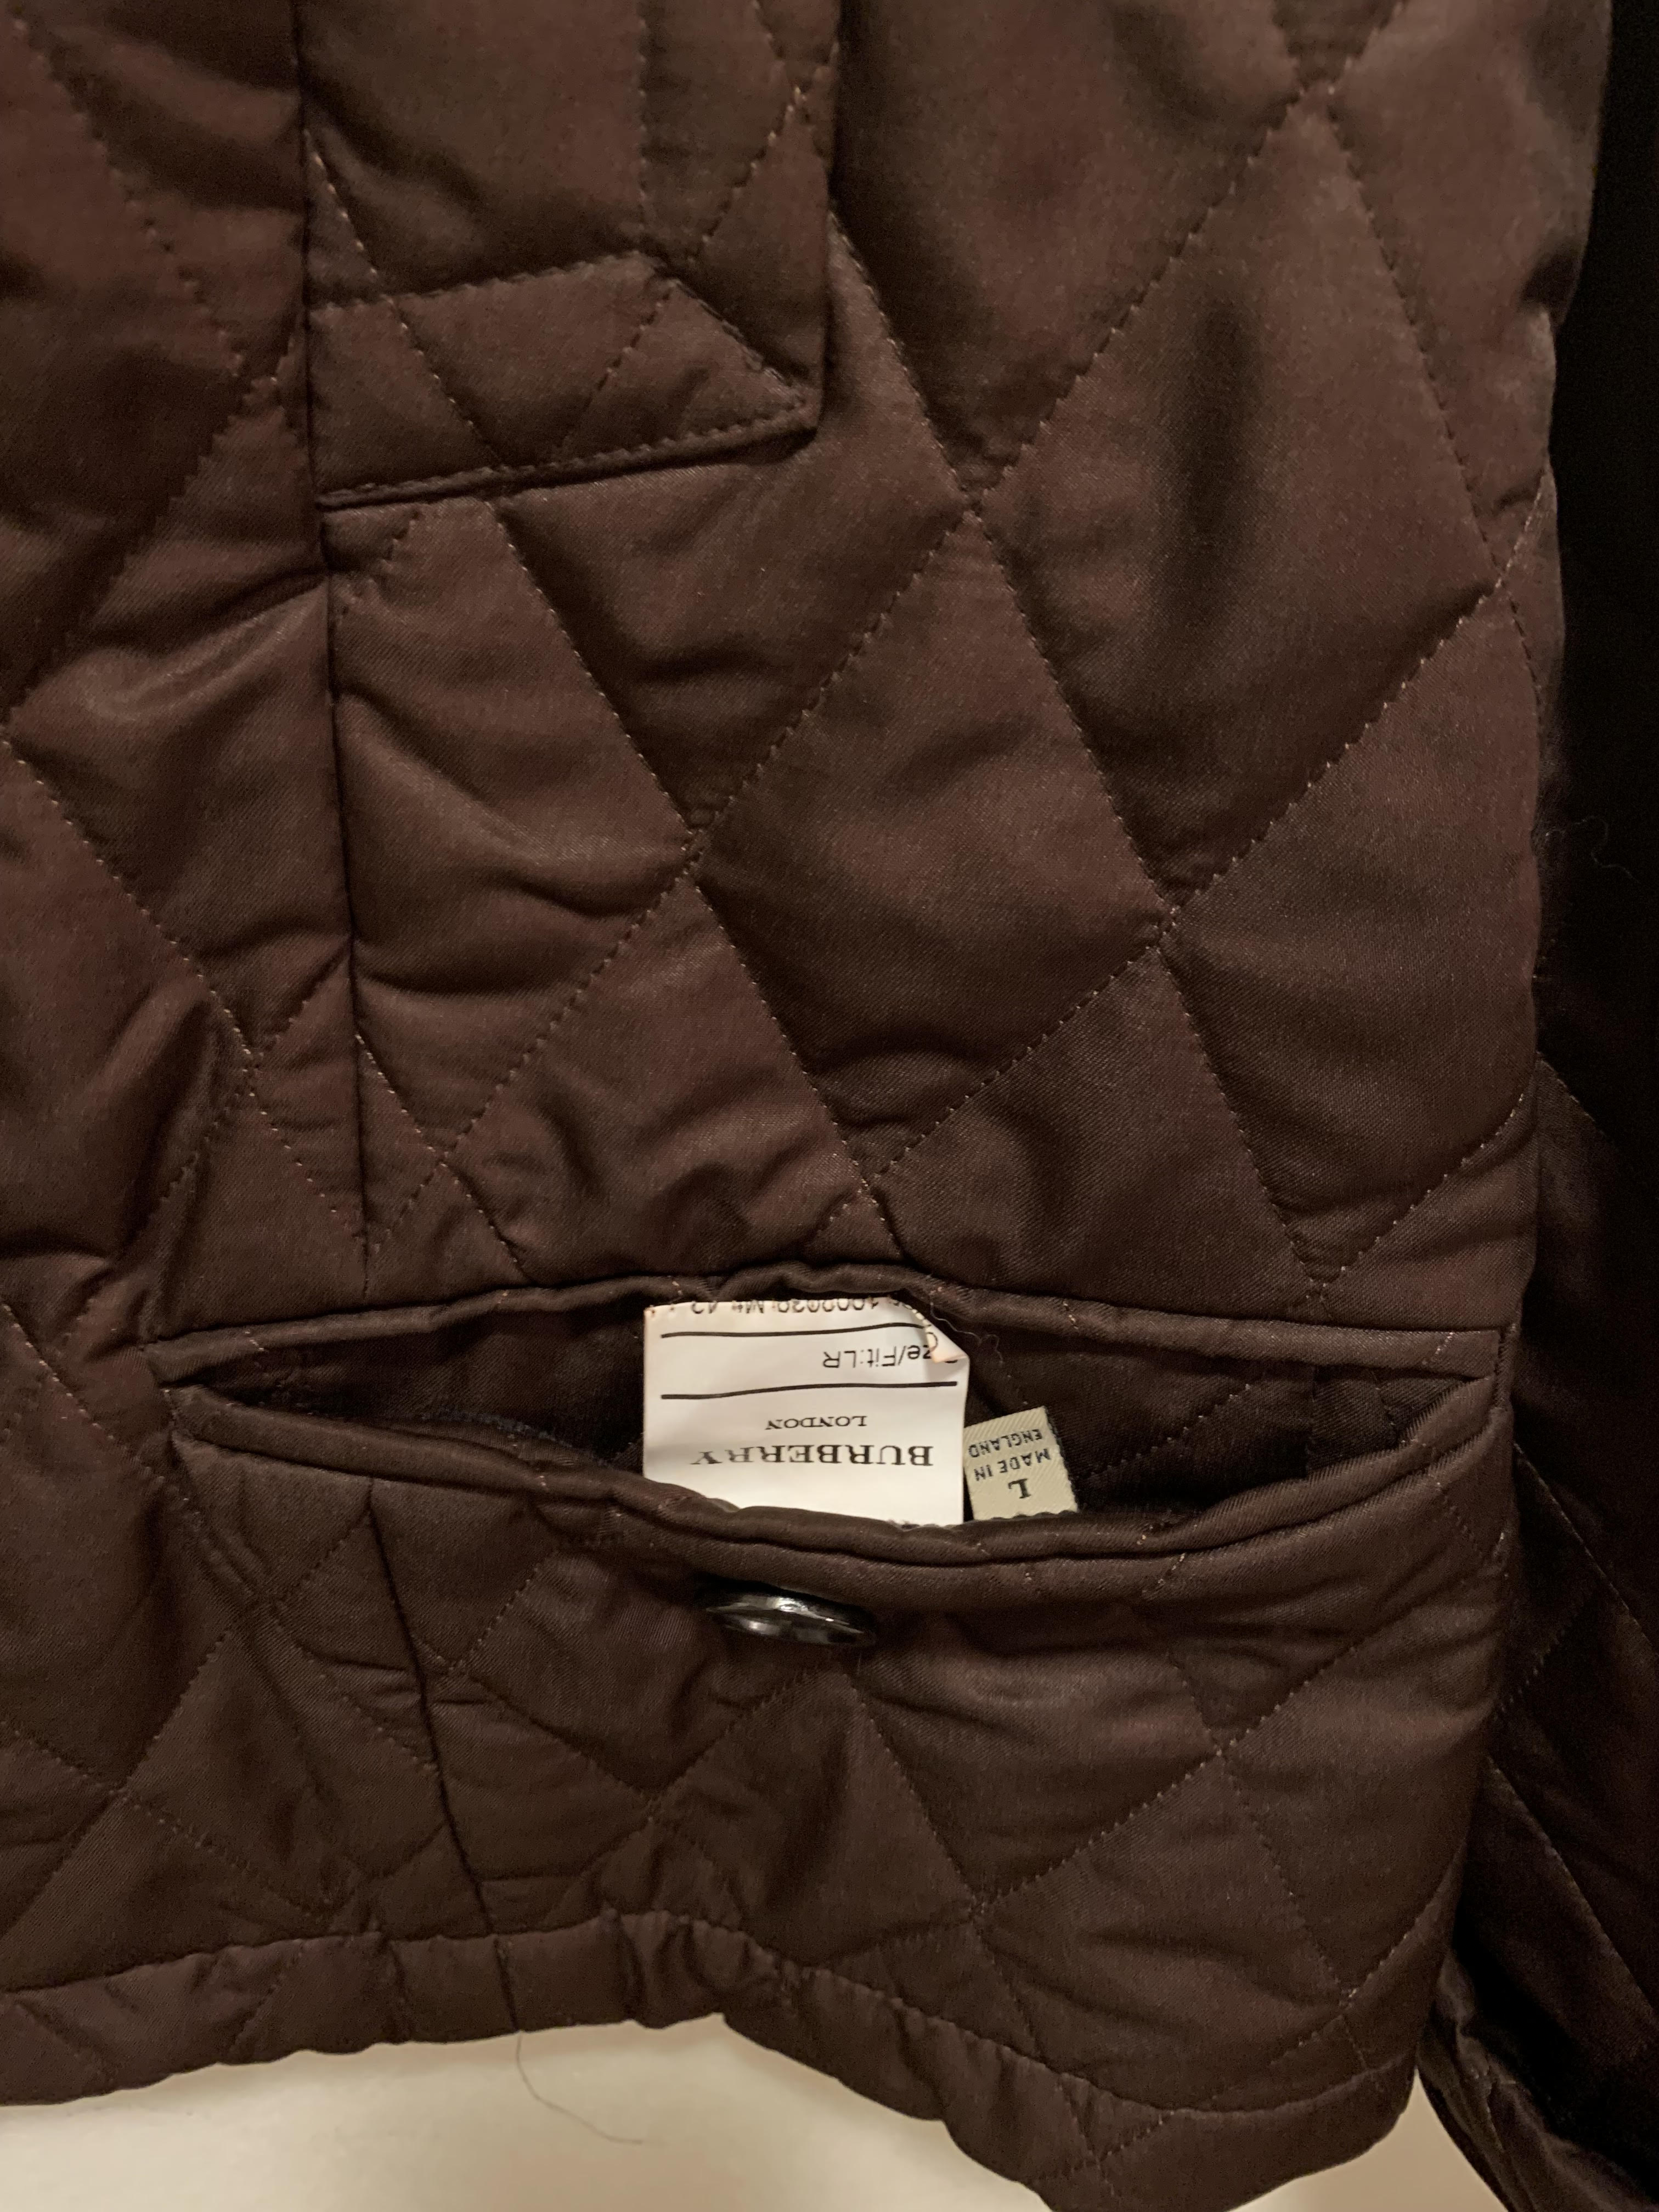 BURBERRY LONDON Women’s Brown Quilted Jacket Size: Large